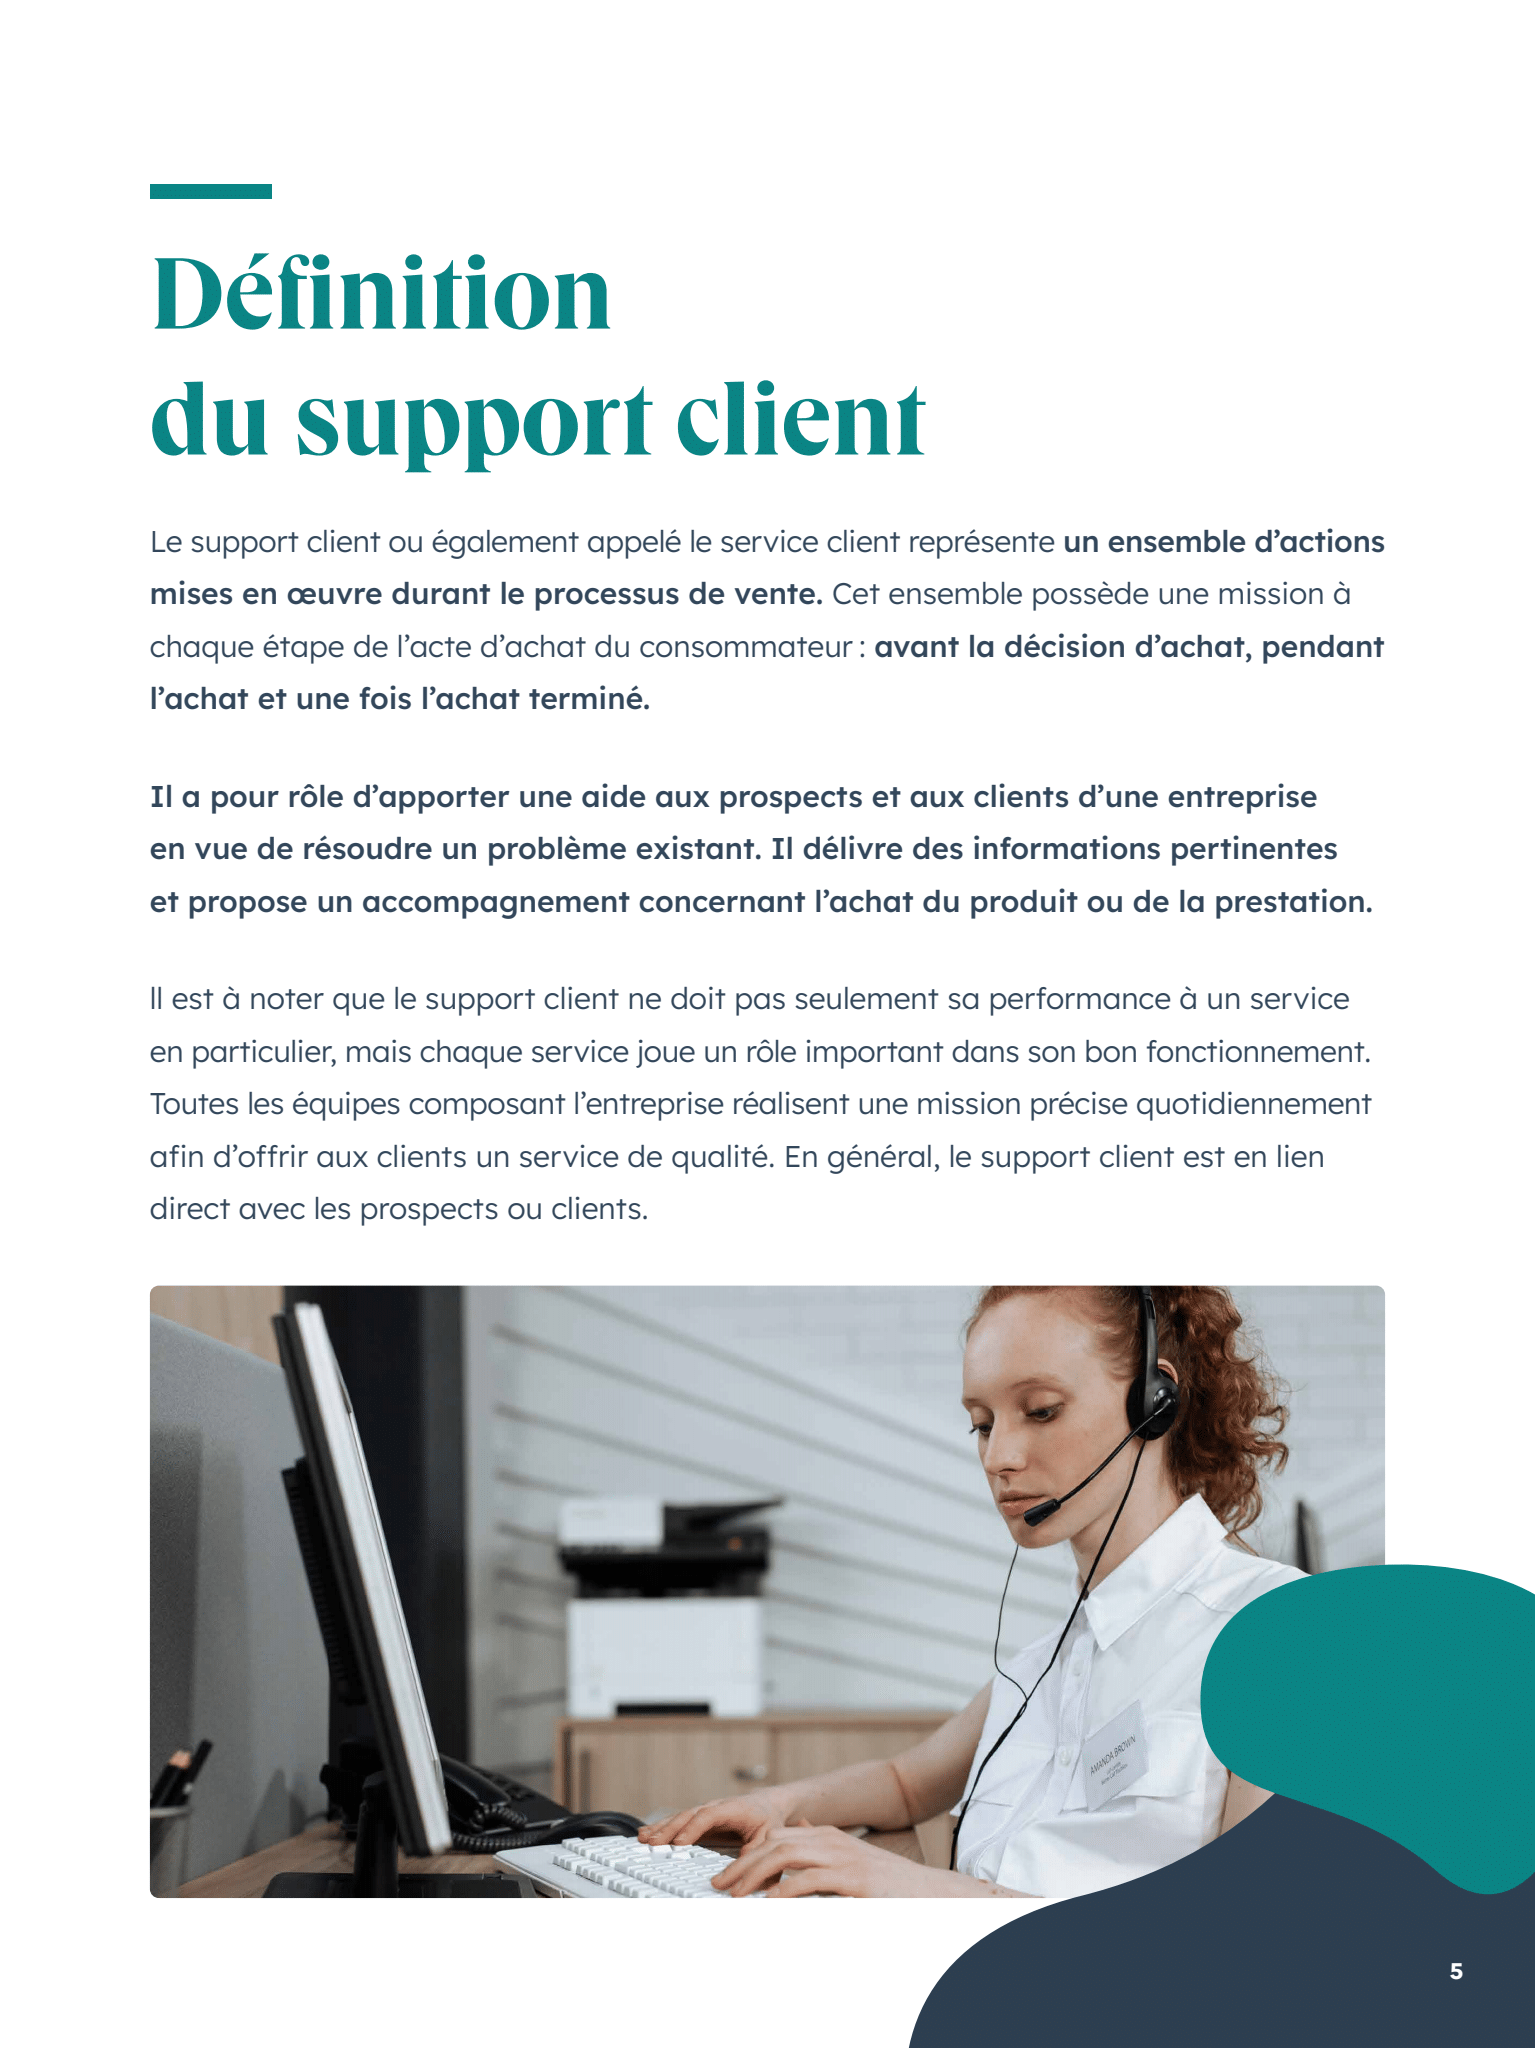 guide-support-client-definition